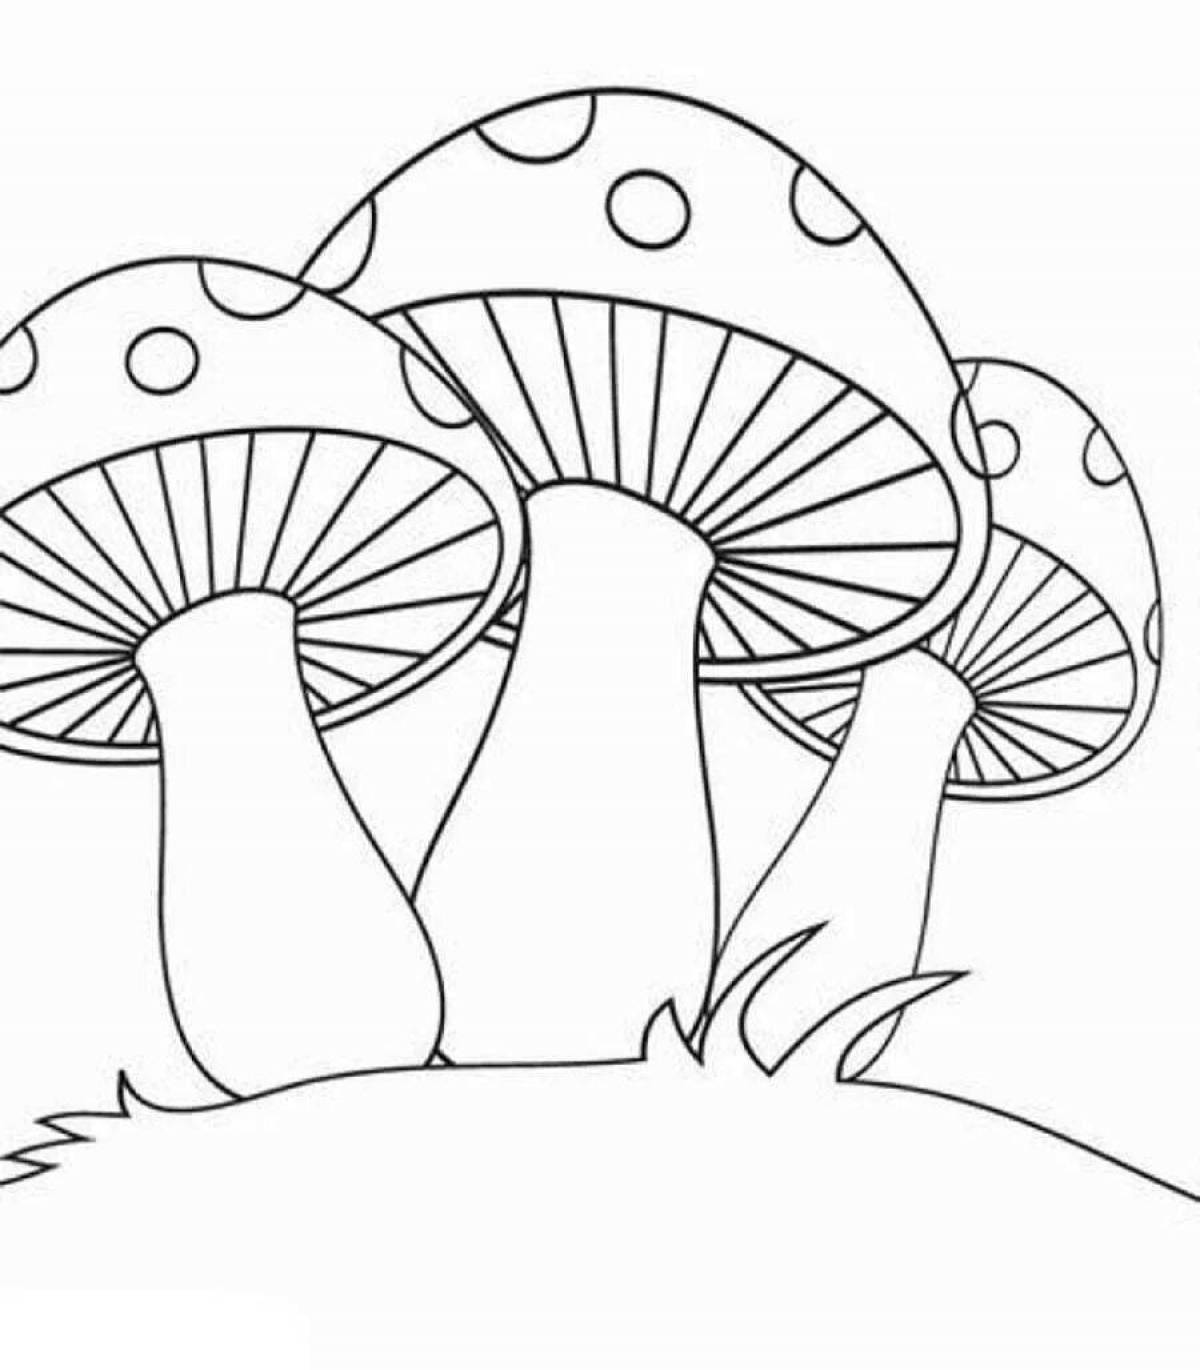 Exquisite fly agaric coloring book for kids